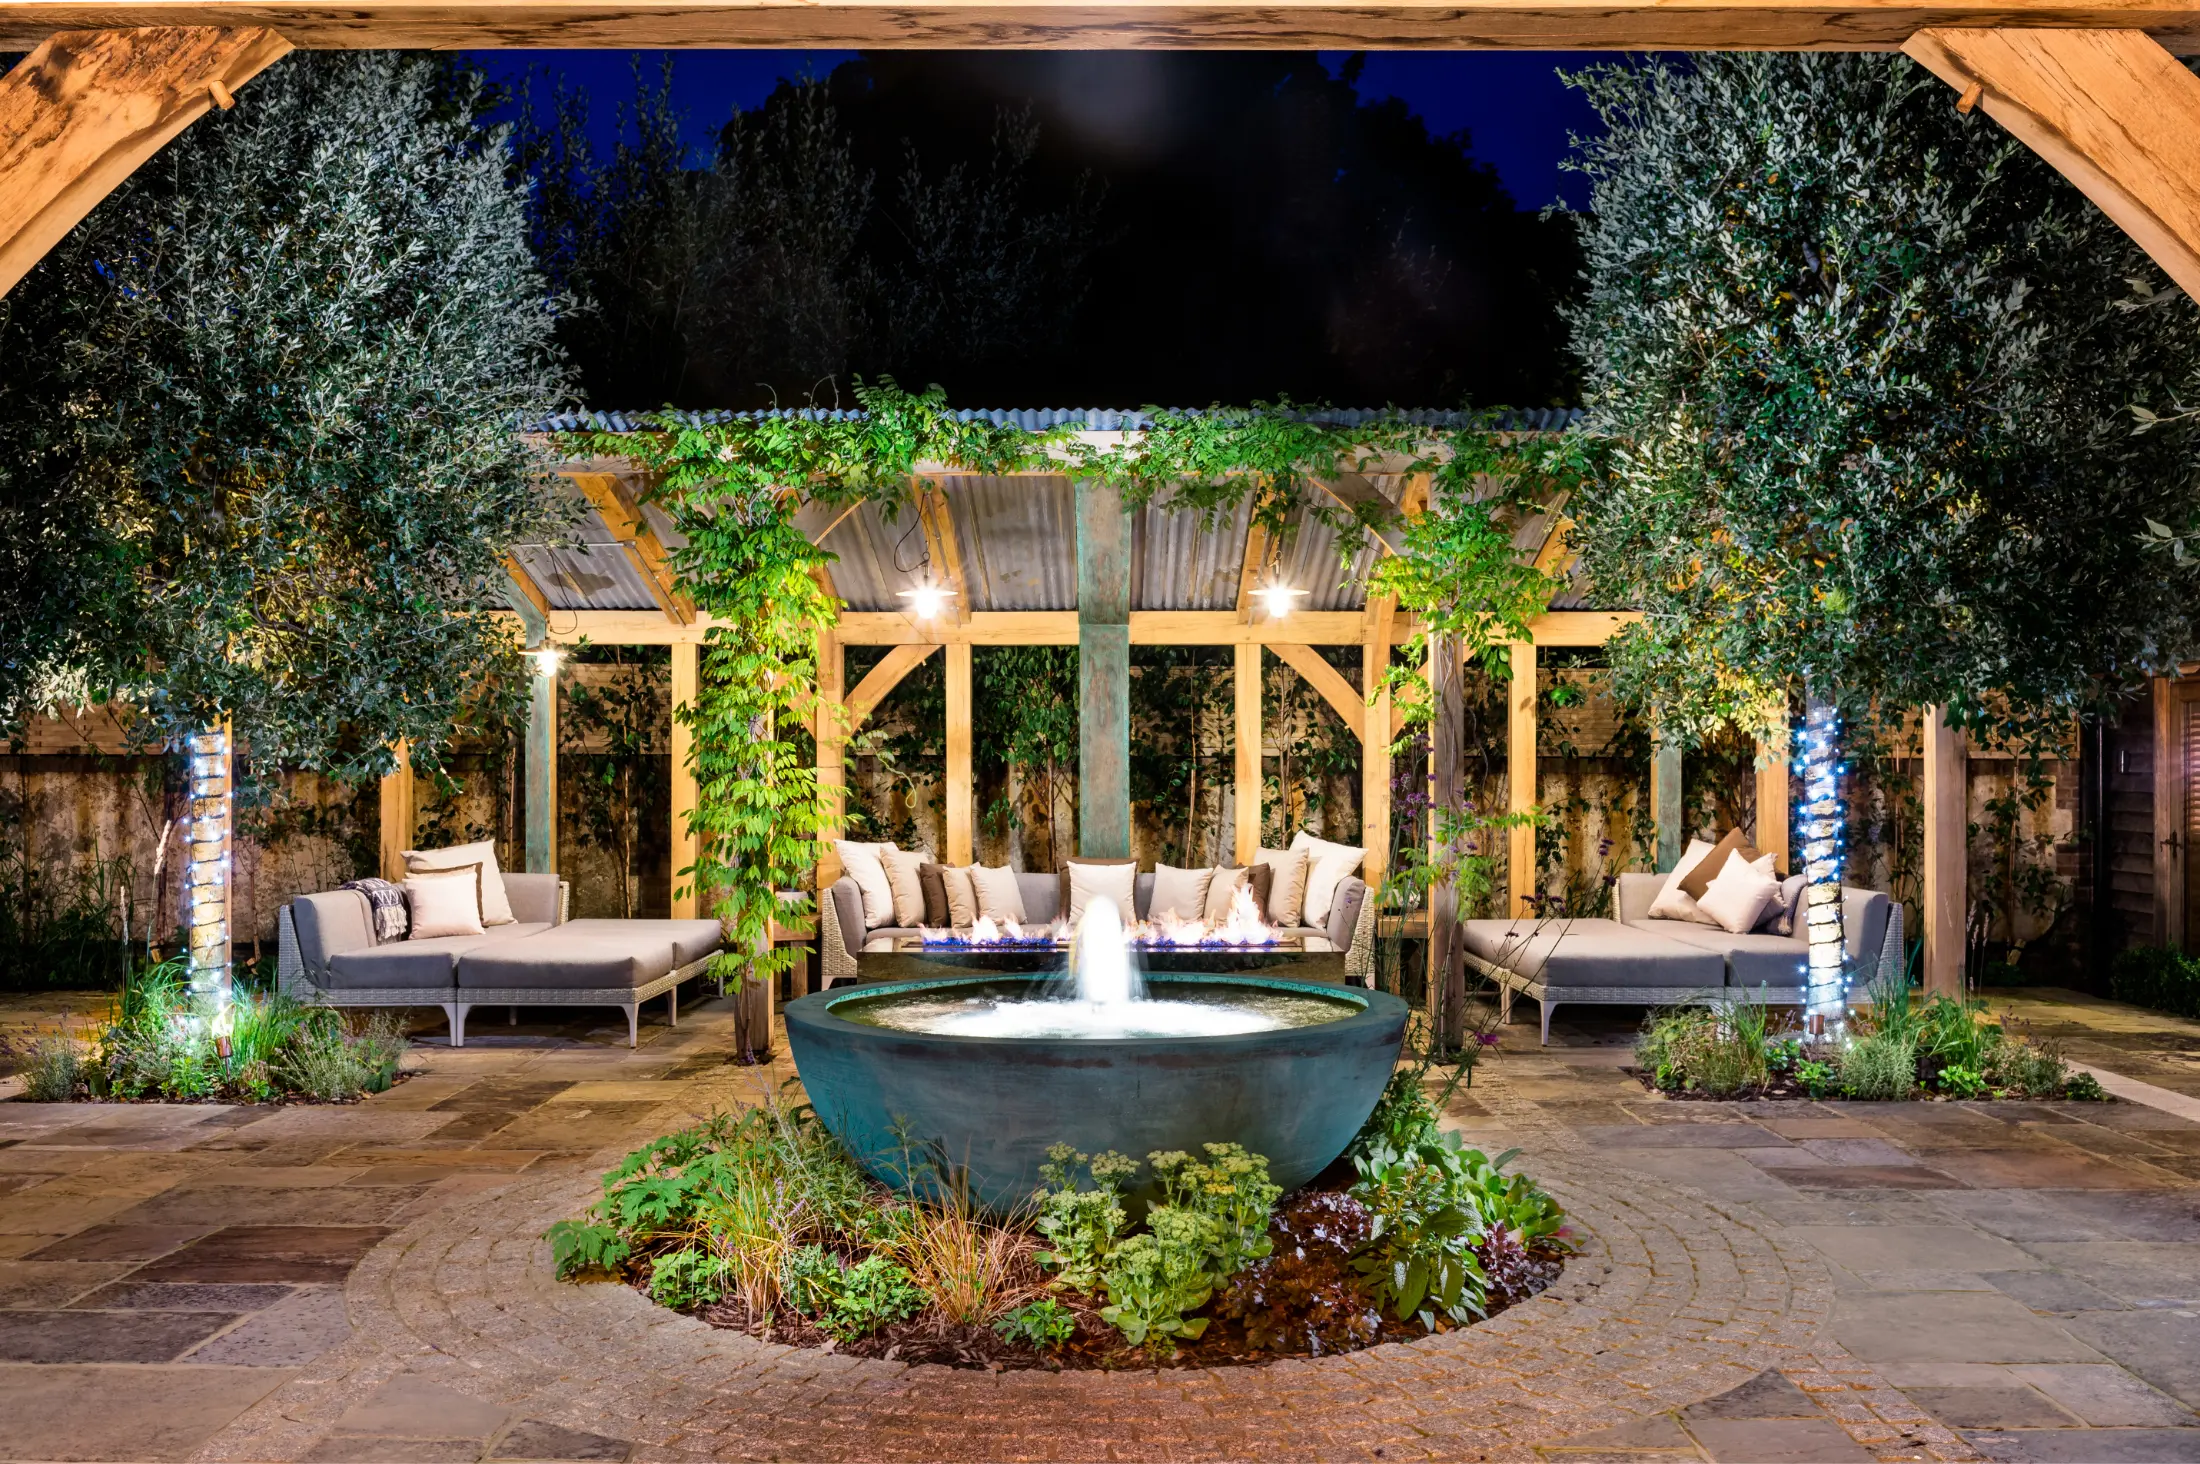 Courtyard For The Senses